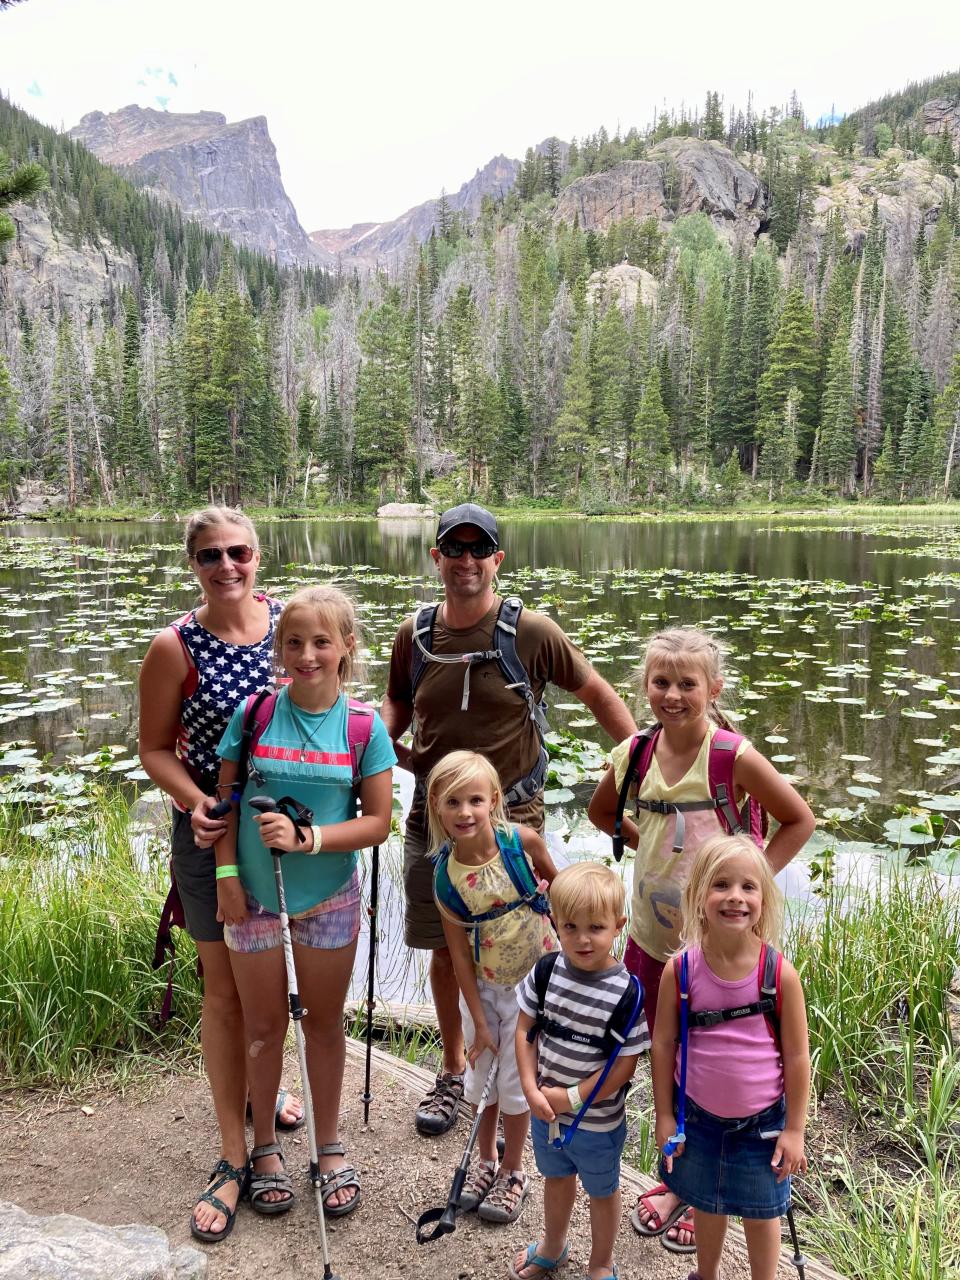 Melanie and Rick Musson of Belgrade, Montana, with their five kids (from left) Emaline, Noelle, Maverick, Lyla and Wren at Rocky Mountain National Park. The Mussons, like many American families, are paying attention to prices and inflation.